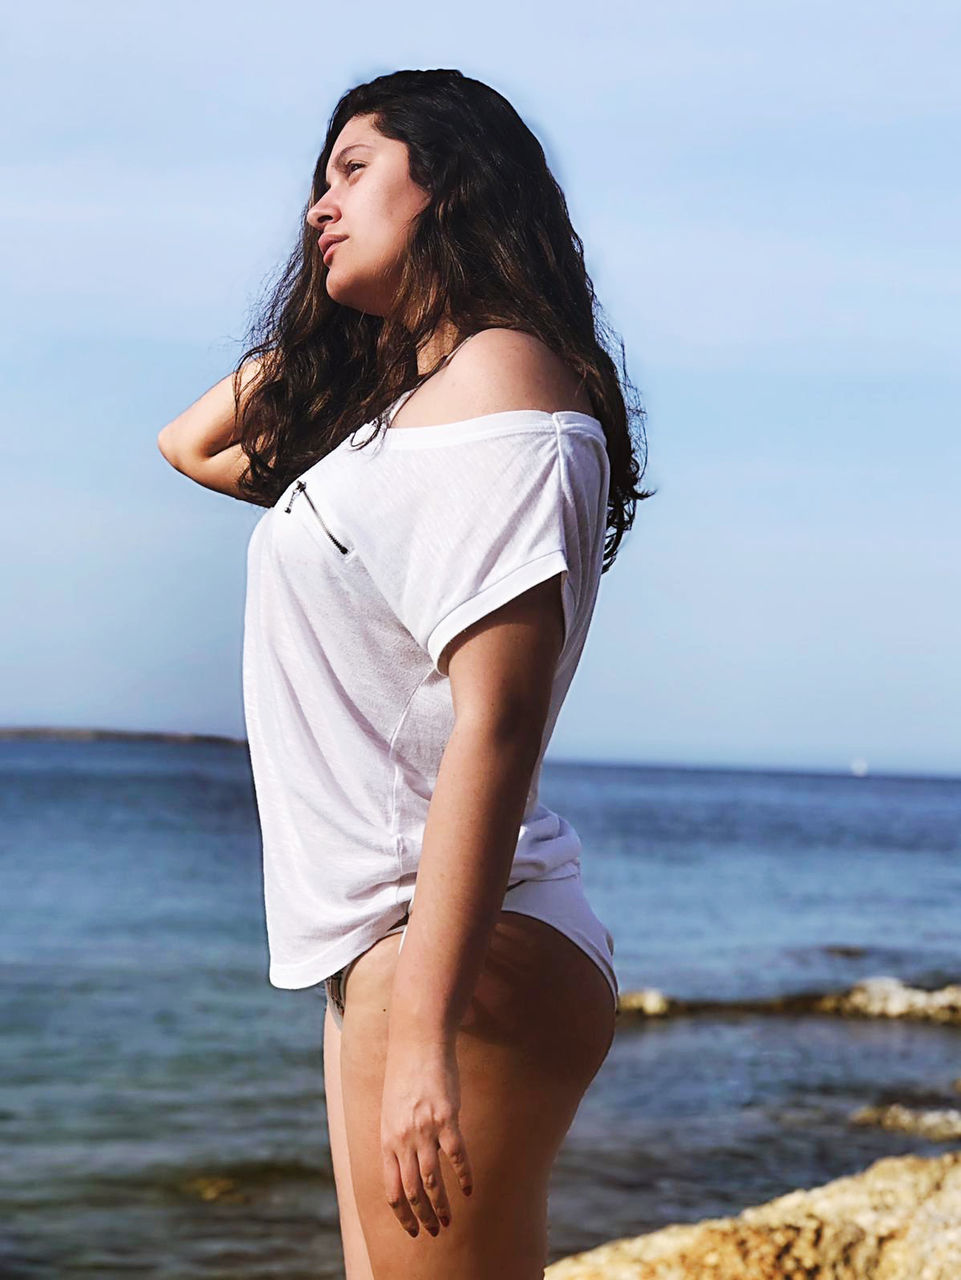 one person, sea, water, leisure activity, young adult, long hair, lifestyles, real people, beach, casual clothing, sky, hairstyle, young women, hair, horizon over water, three quarter length, horizon, standing, beauty, beautiful woman, outdoors